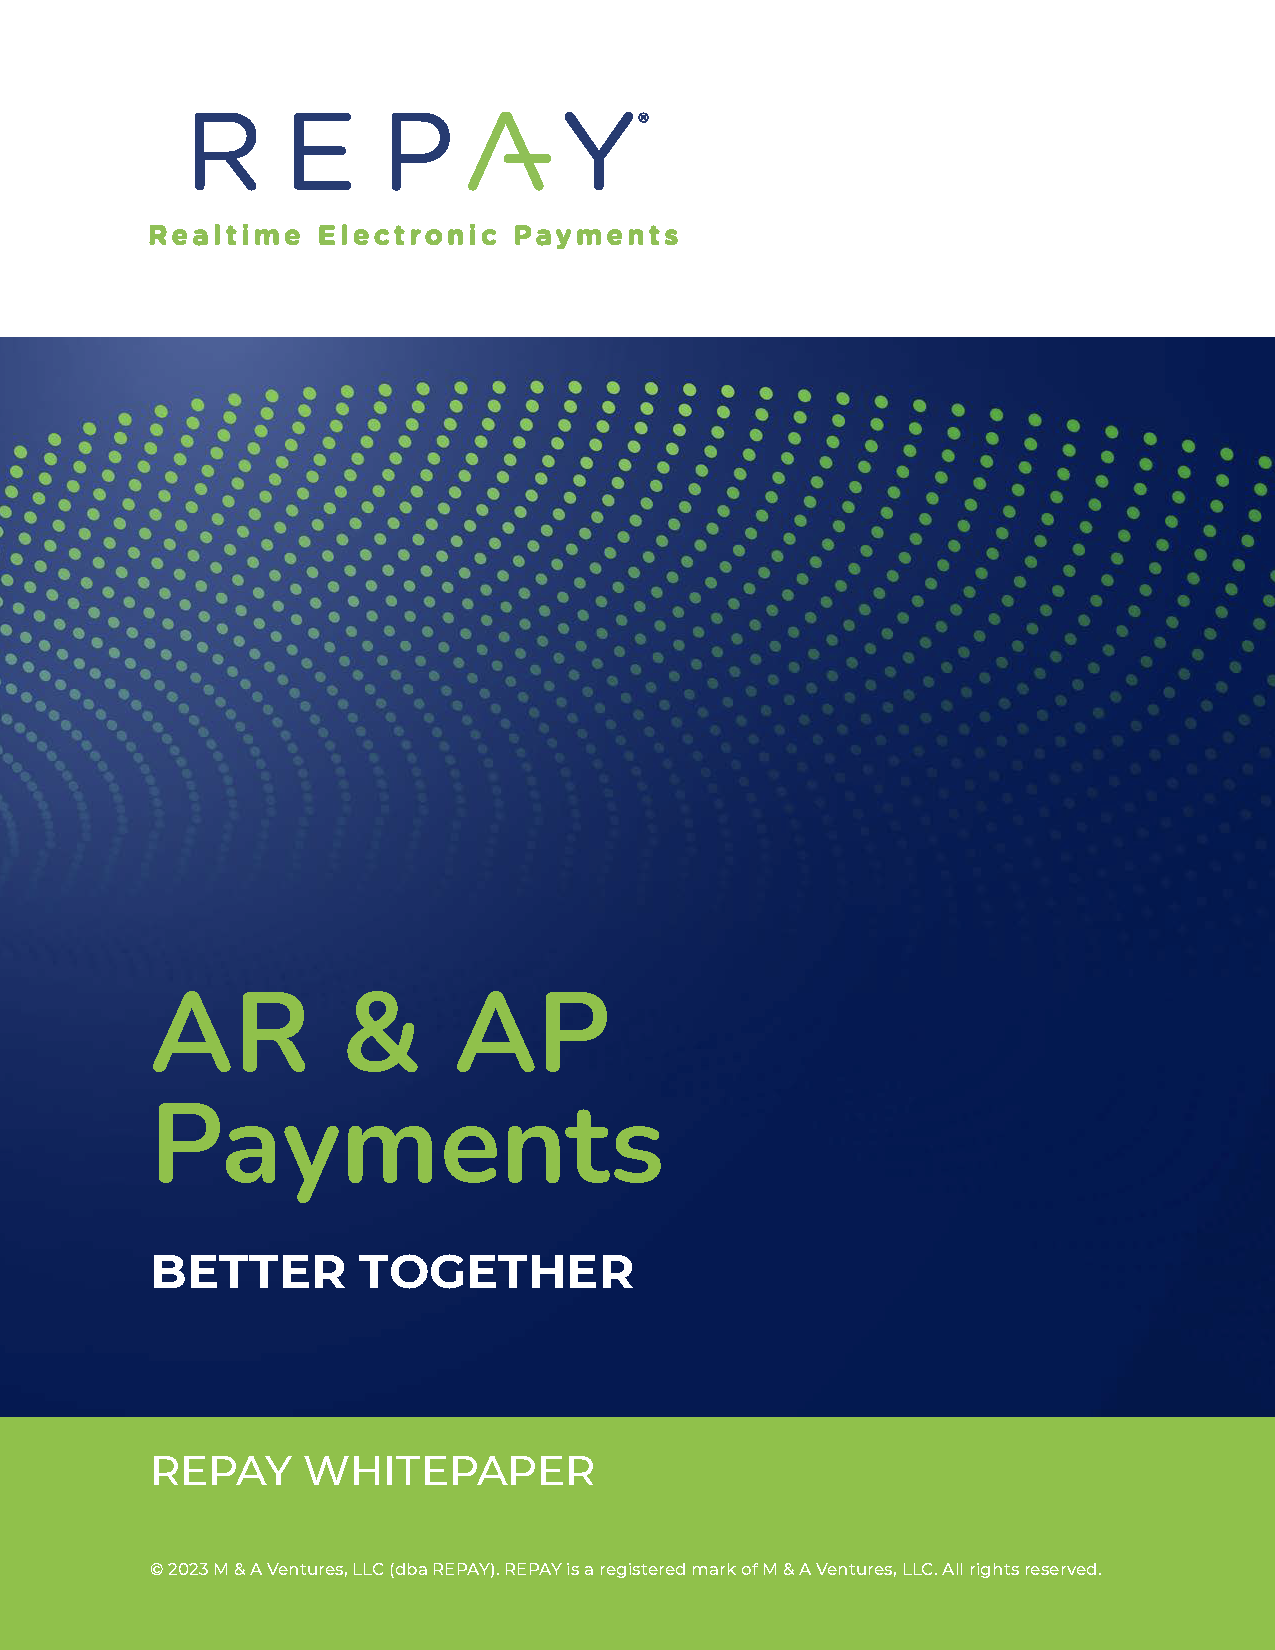 AR & AP Payments: Better Together